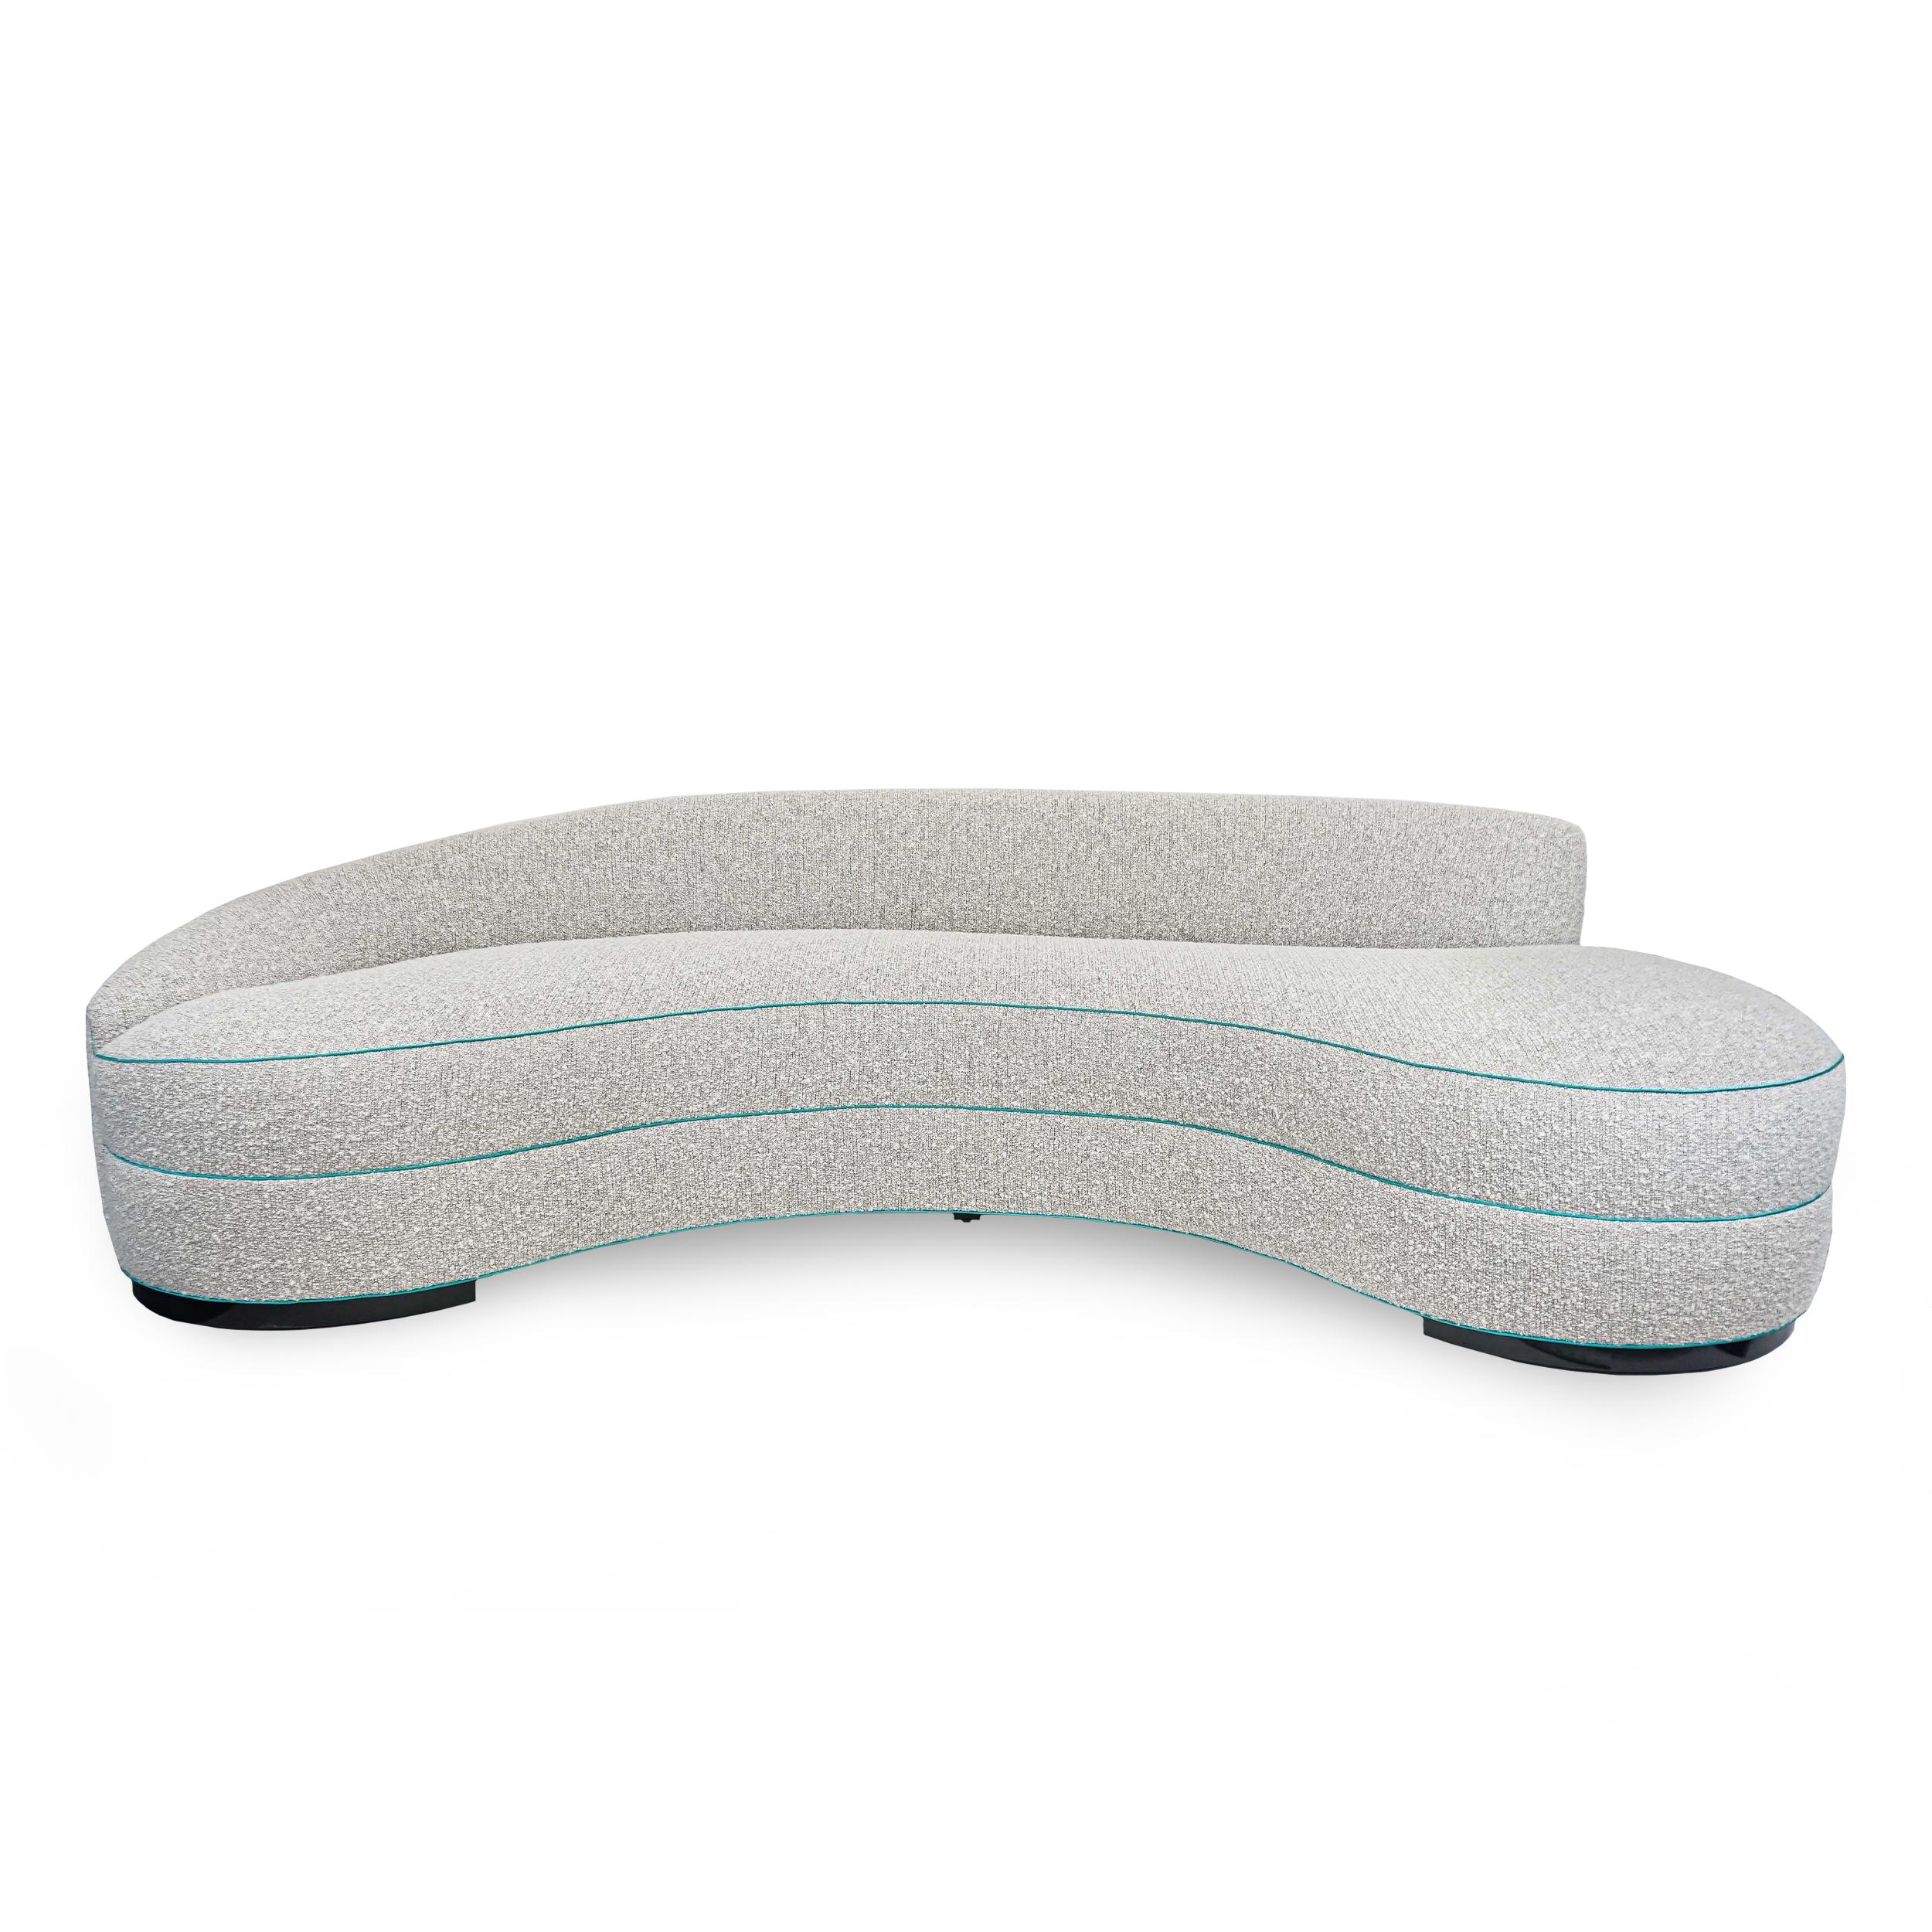 Mid-century modern curved sofa with tight seat and tight back. Upholstered in a light grey / tonal woven with variegated patches of ashy white boucle blend (alpaca, wool, mohair). Contrasted with turquoise sateen welting. Eight-way hand-tied springs